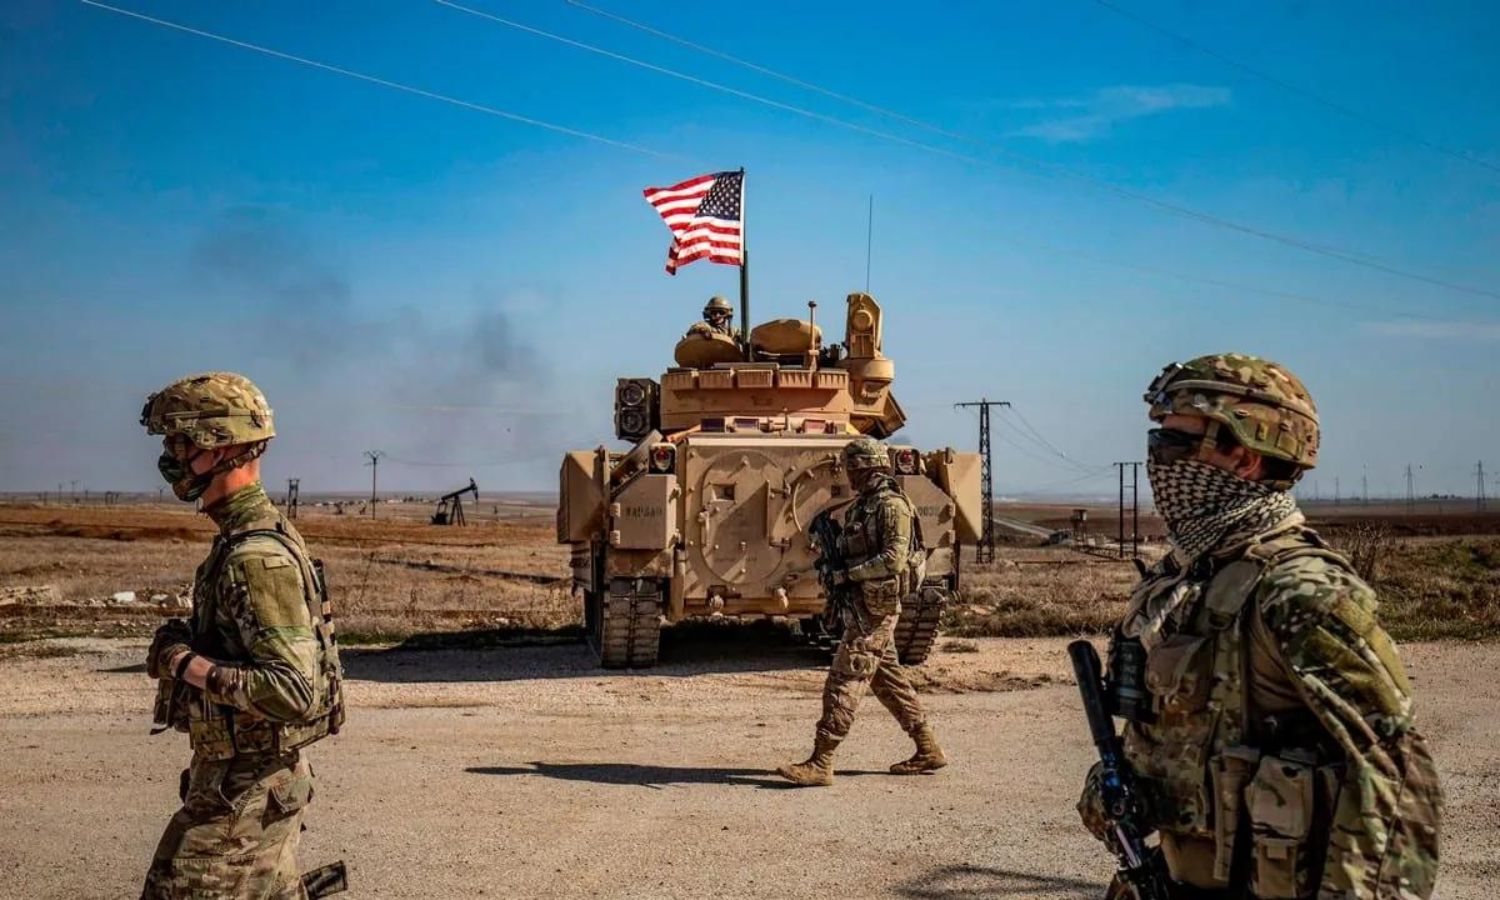 A patrol of American forces in the oil fields in Suwaidiyeh in al-Hasakah governorate, northeastern Syria - February 13, 2021 (AFP)